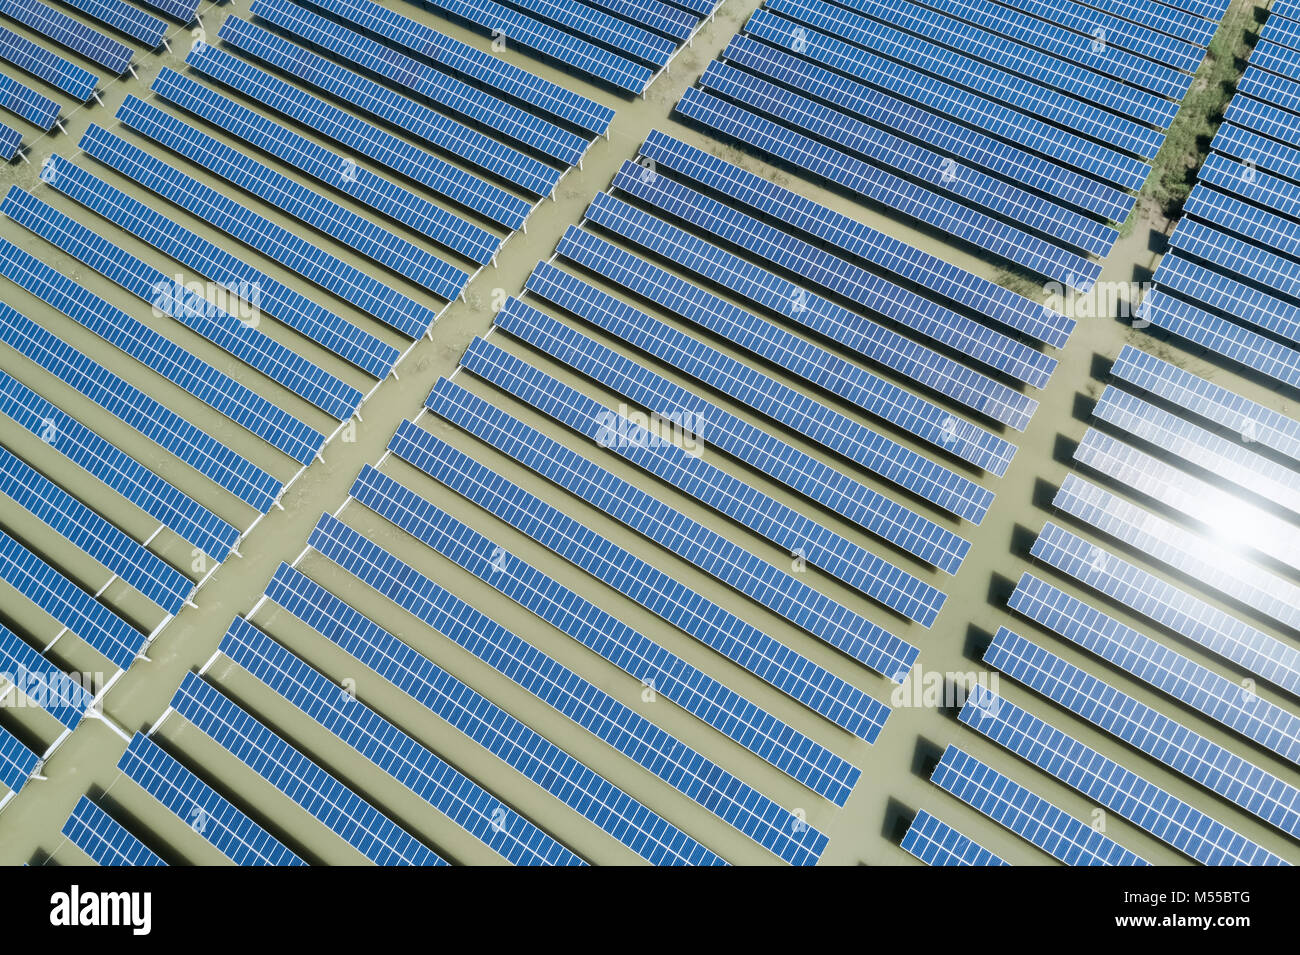 aerial view of solar energy field Stock Photo